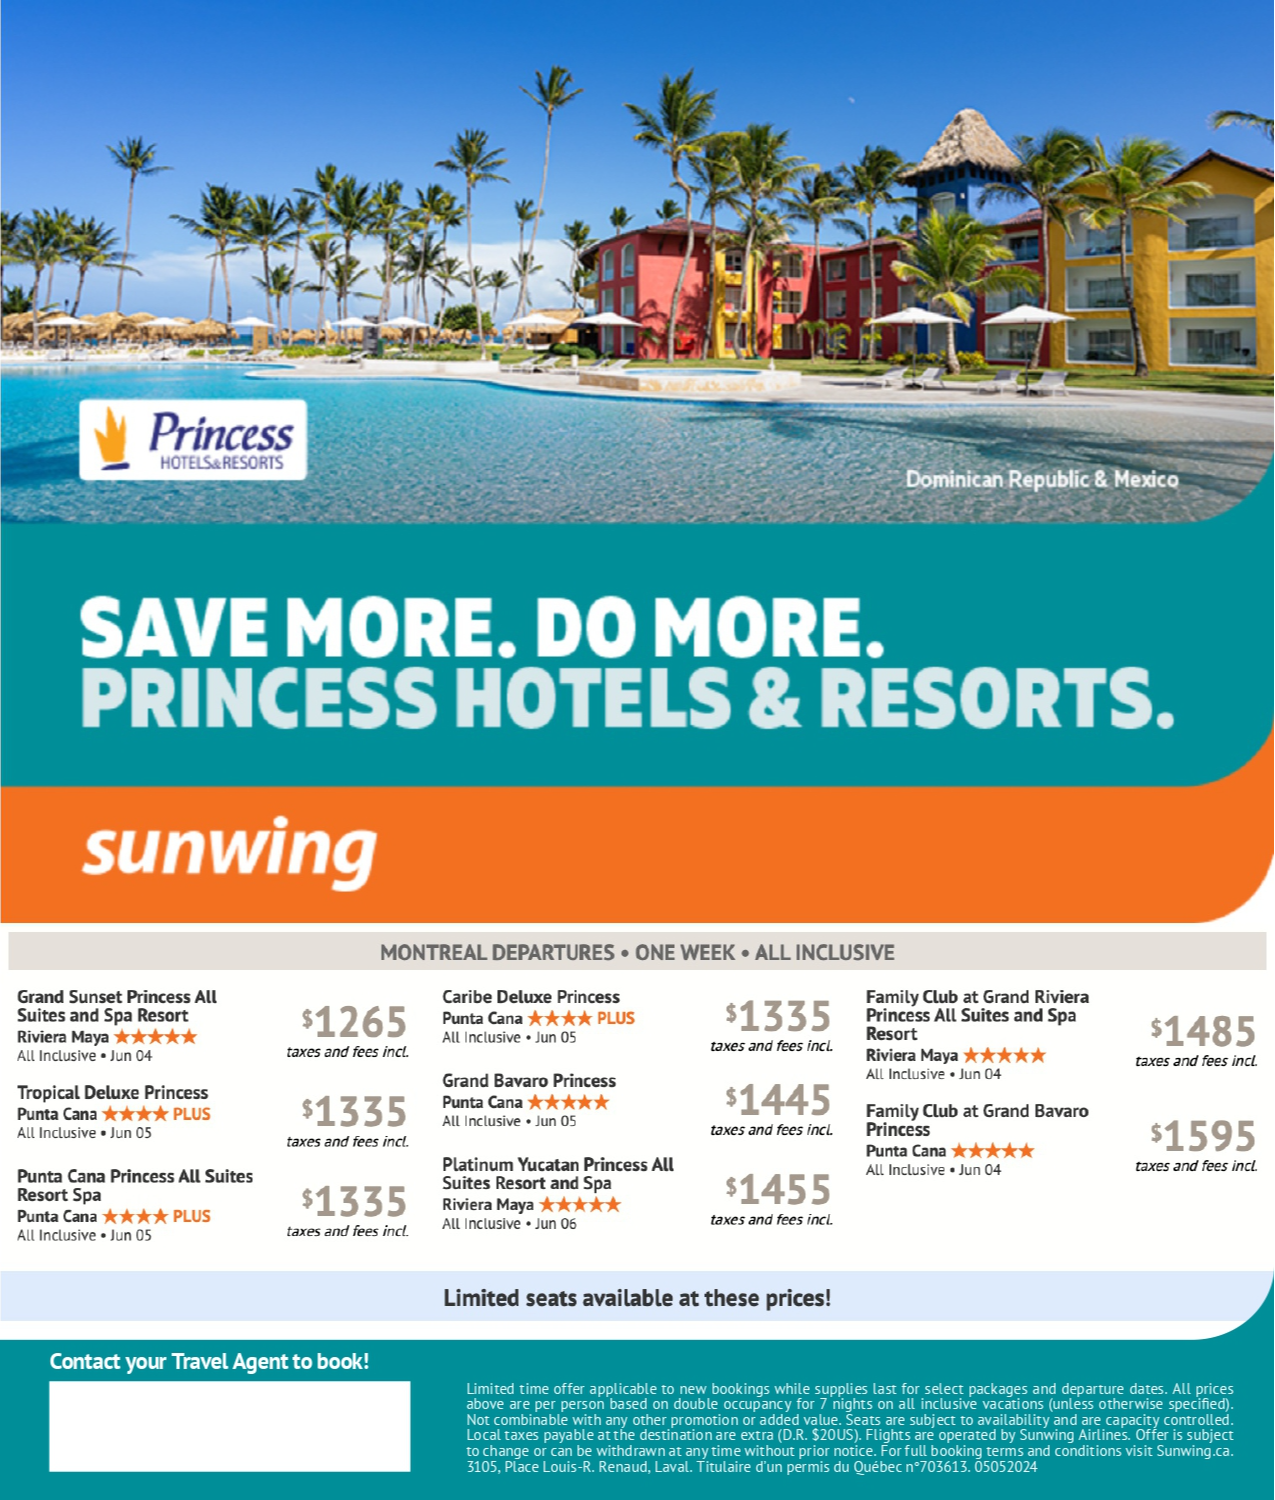 Sunwing Promotions Fall in Love with Panama with Aqua Terra Travel